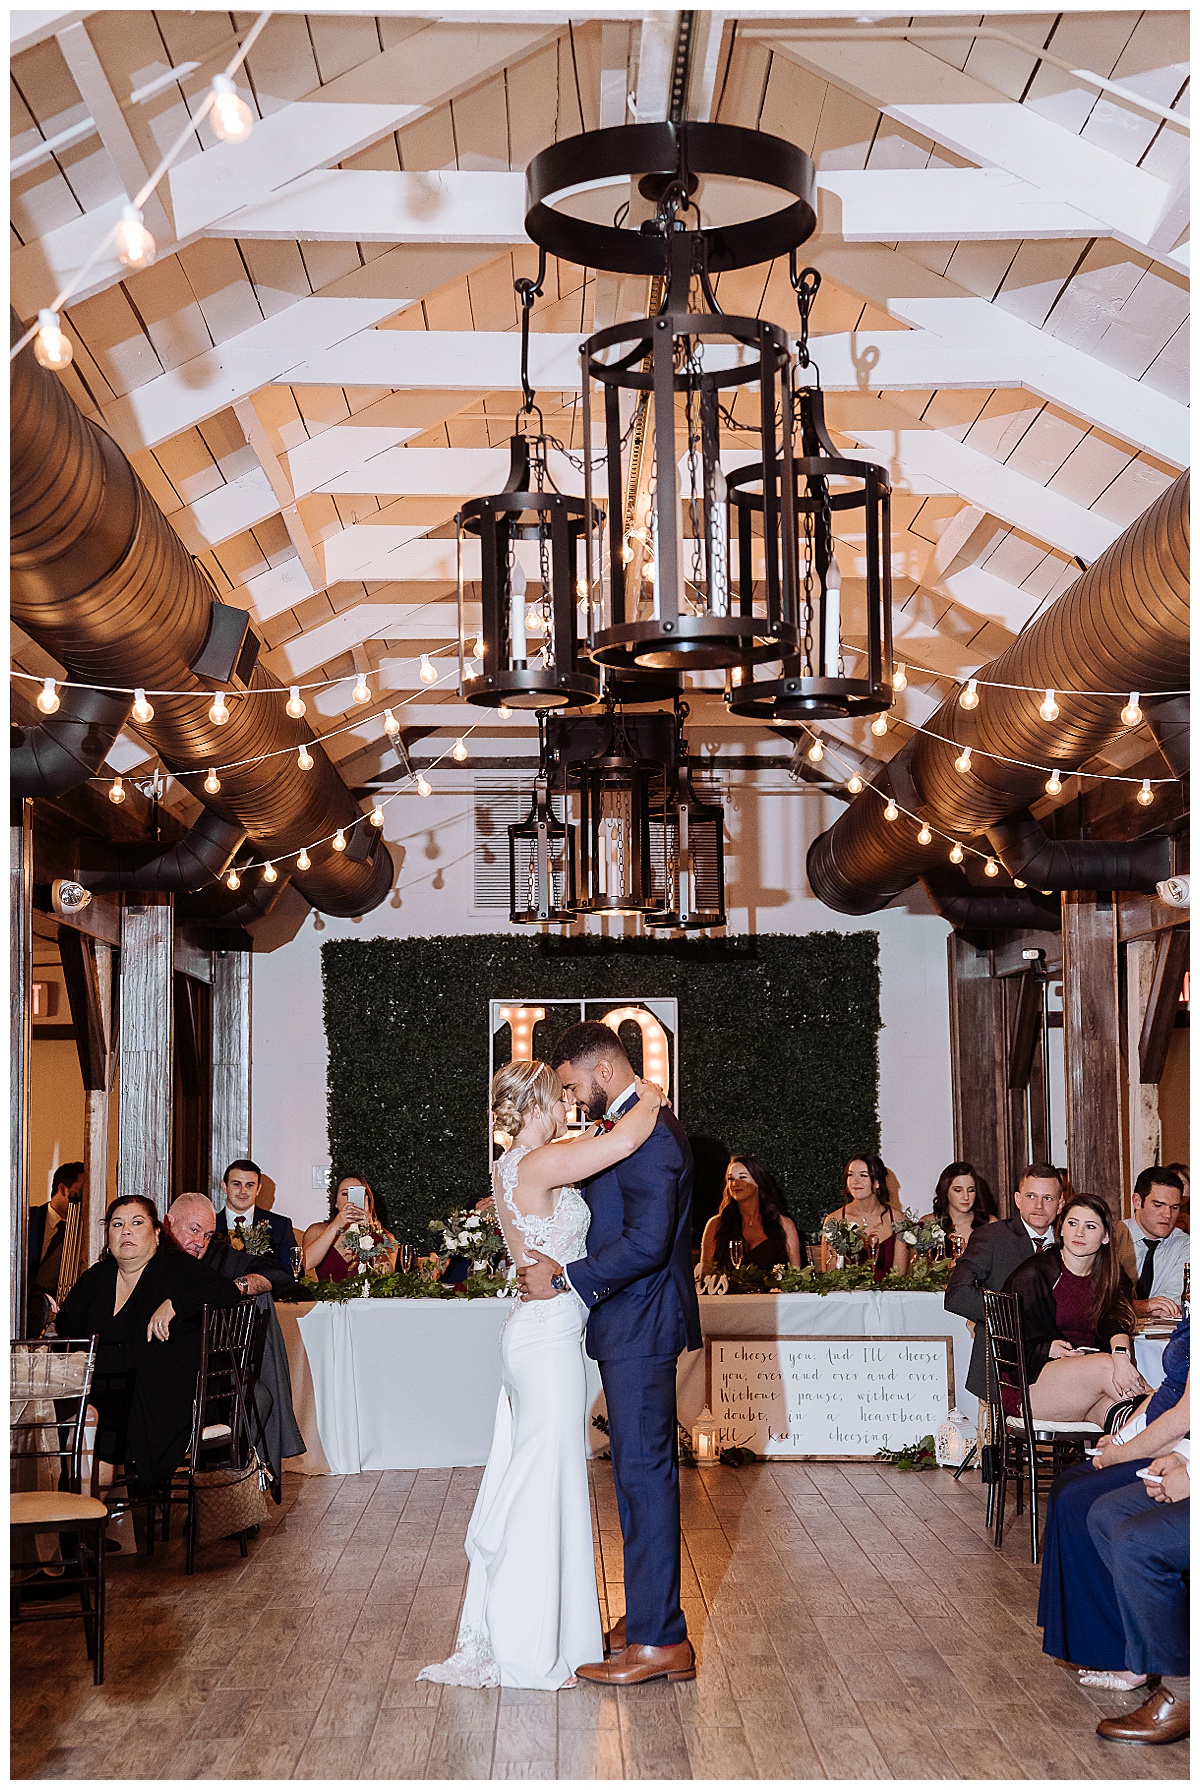 First dance at the Windmill Winery